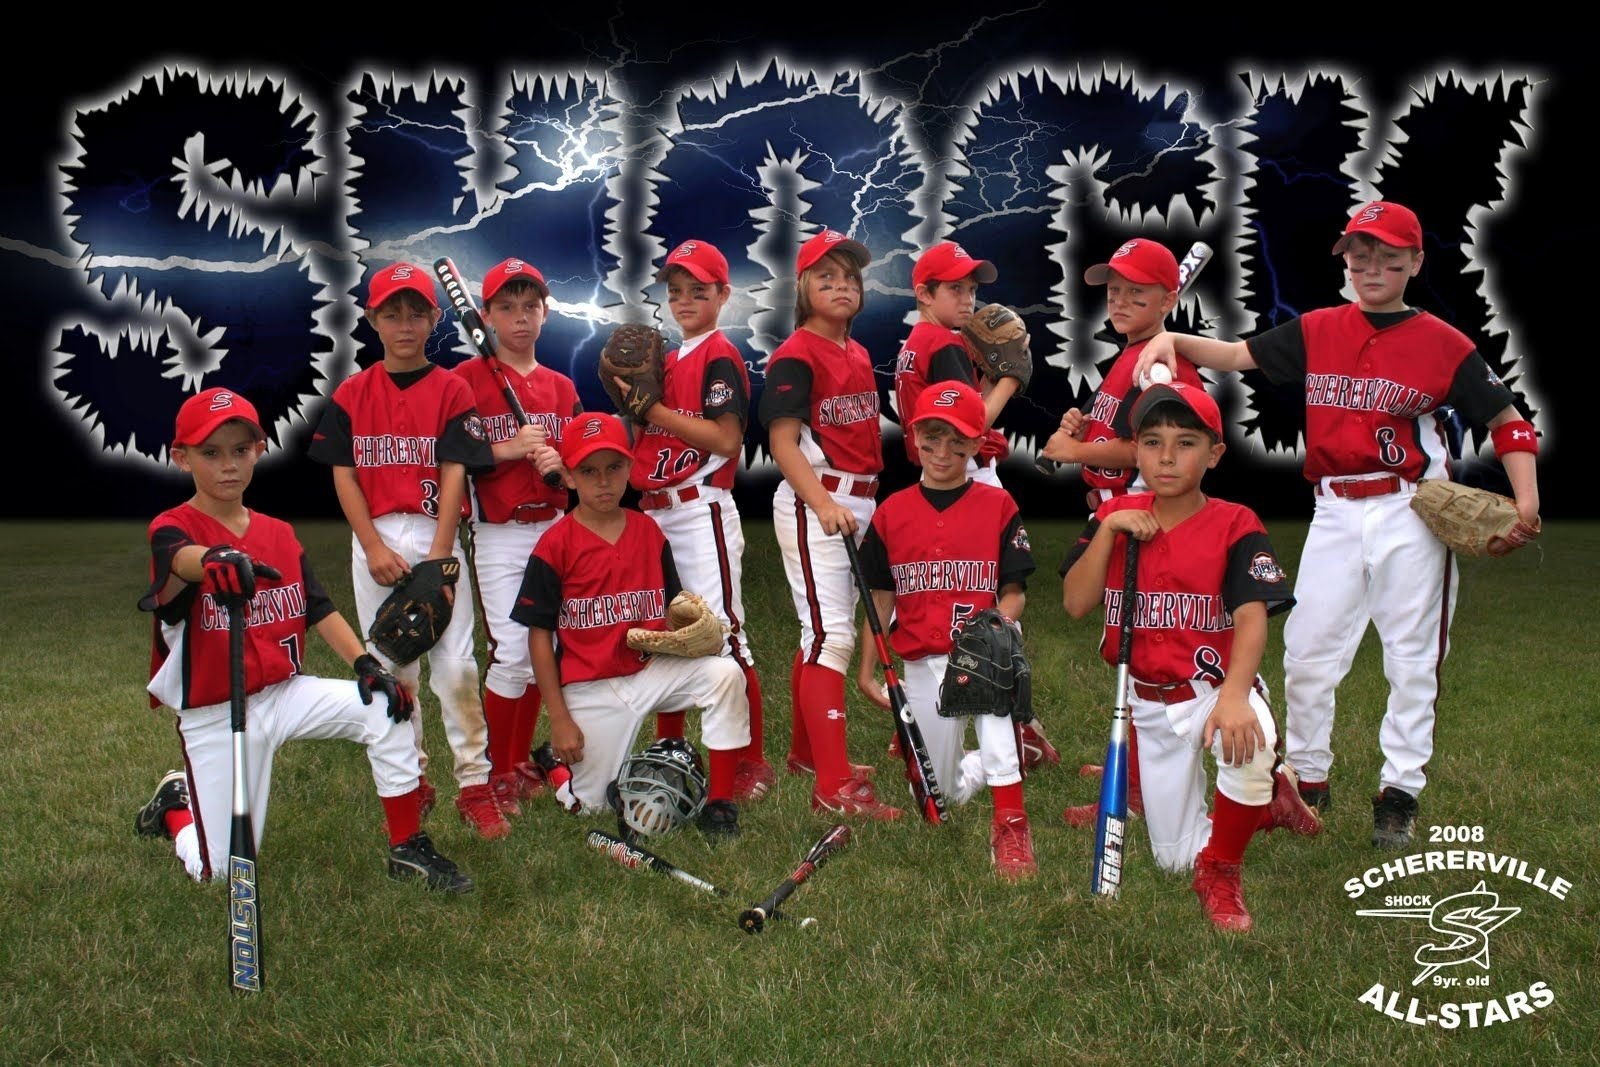 10 Stylish Fastpitch Softball Team Names Ideas baseball team pictures ideas the background and added the team 2022